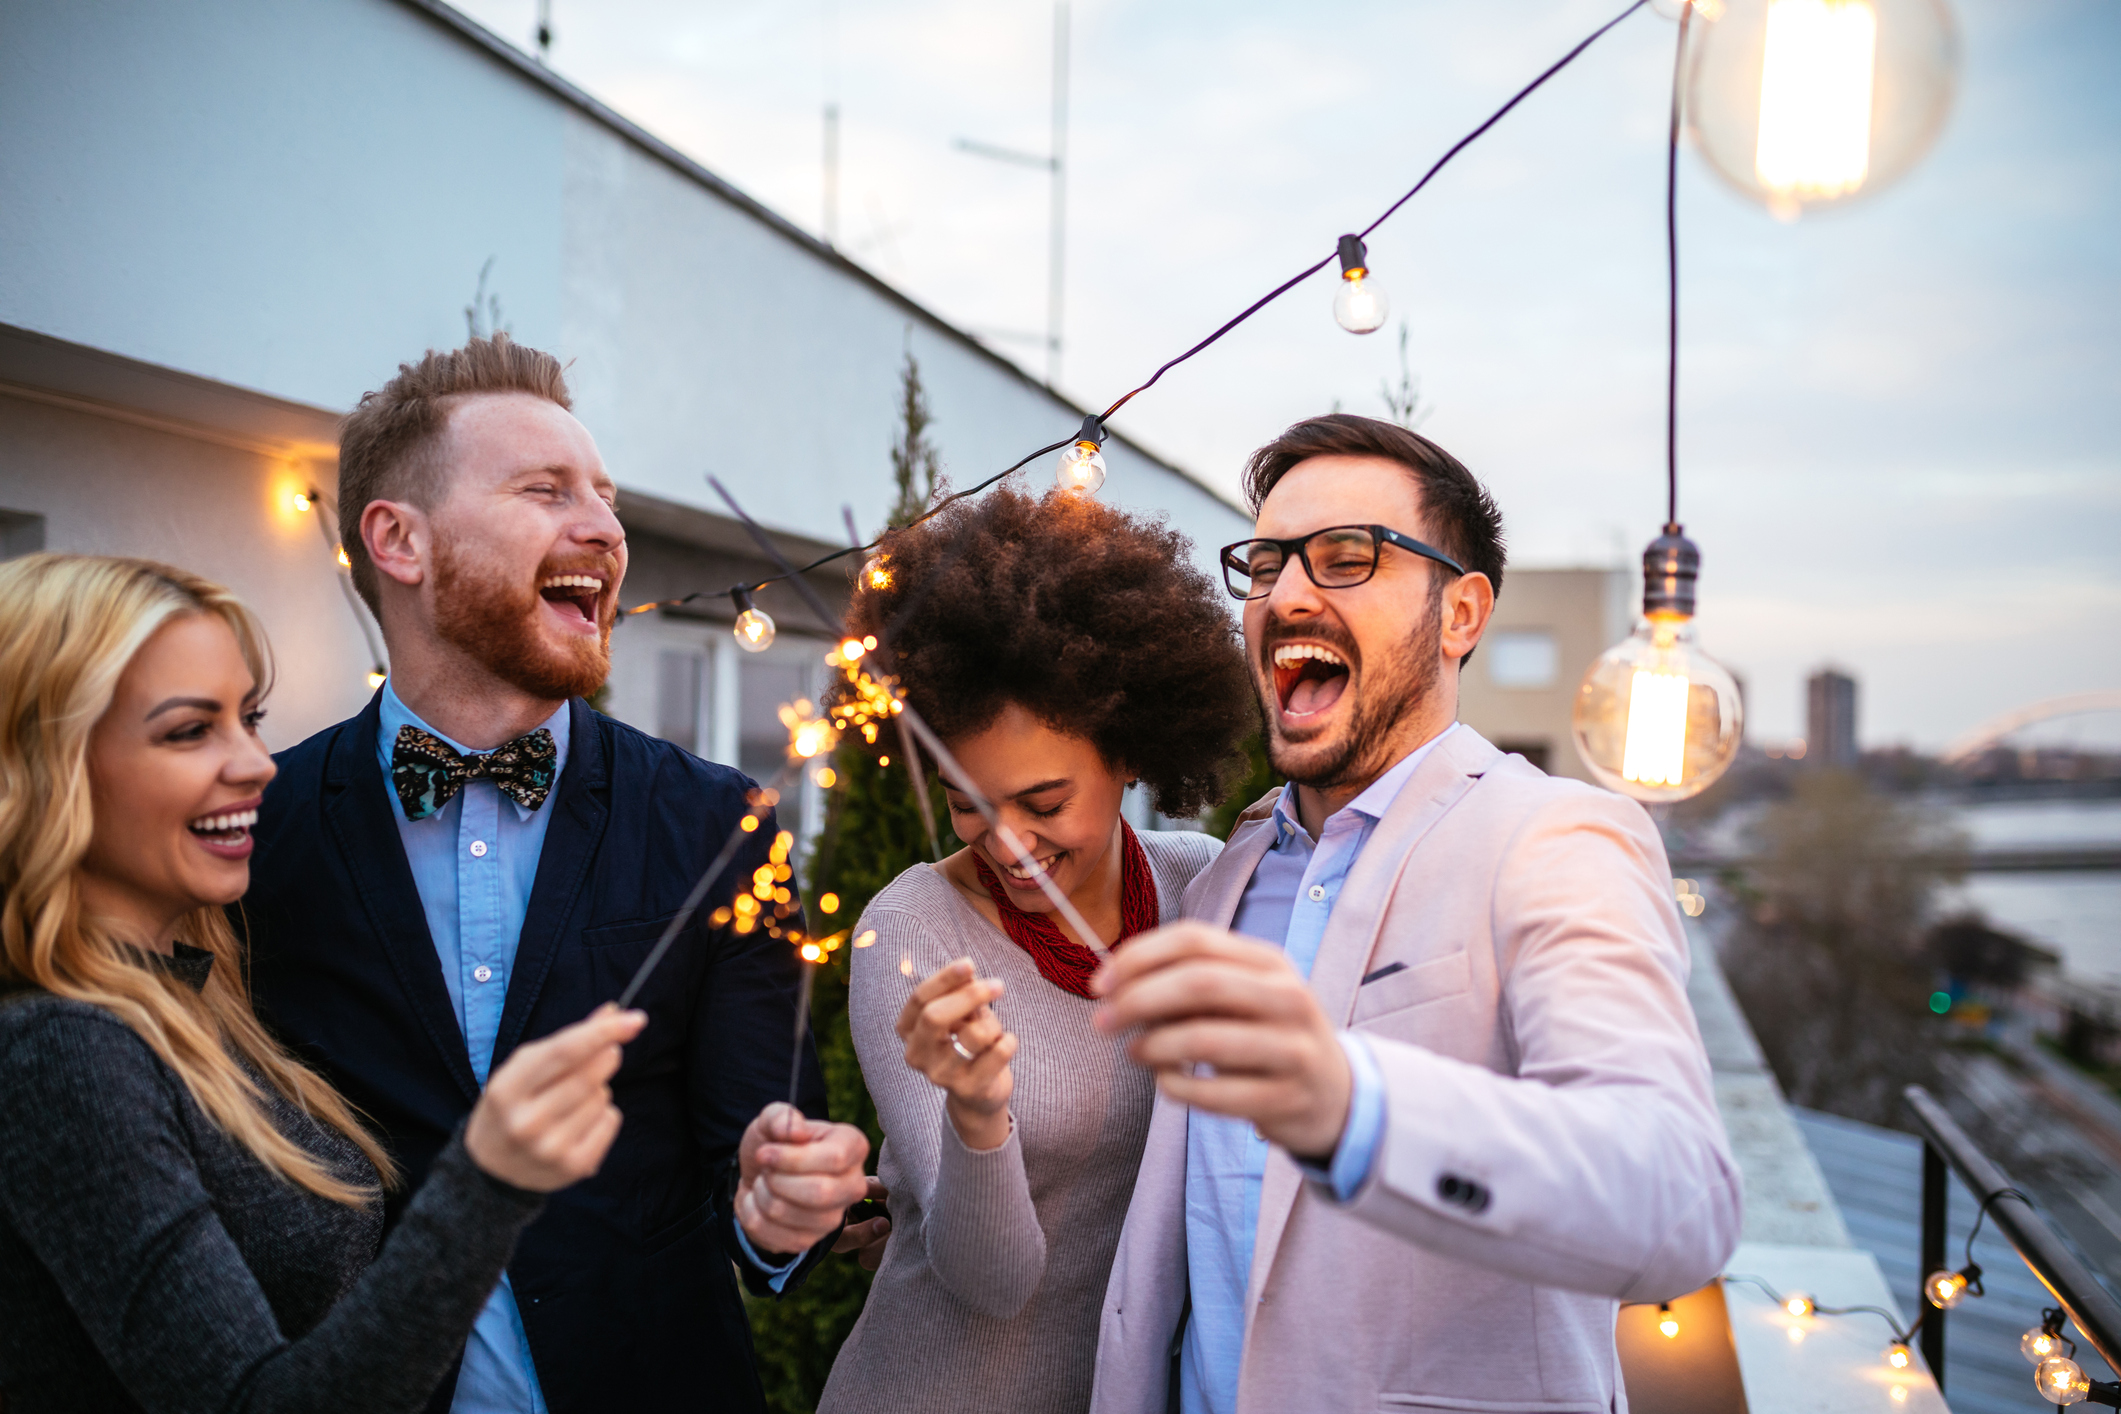 Plan your IT project with a technology solutions partner for the same reason you’d use a caterer to make sure your company party goes off without a hitch.